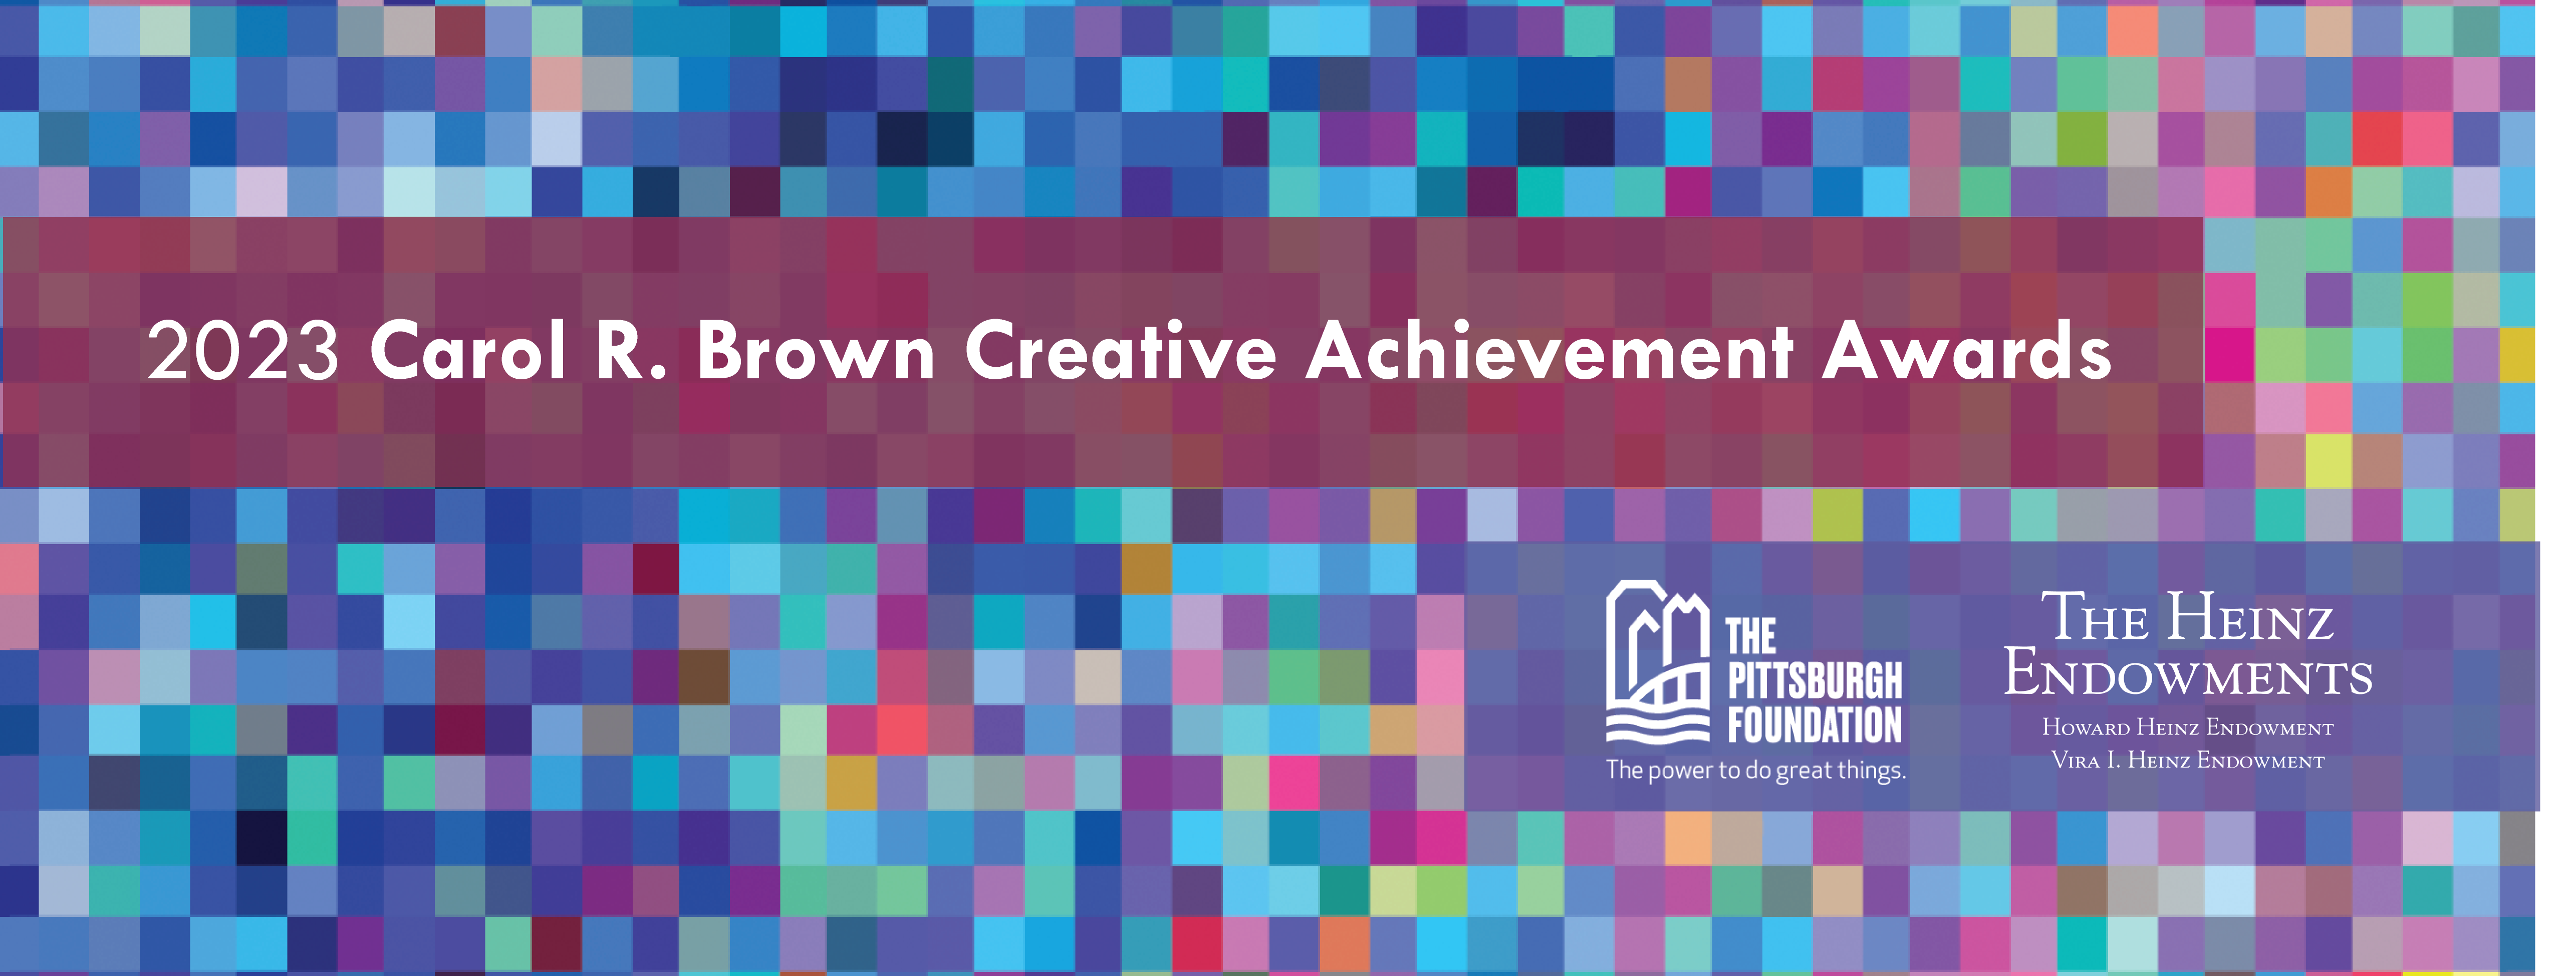 Nominate Artists for a $50,000 Carol R. Brown Creative Achievement Award Oct. 3-5